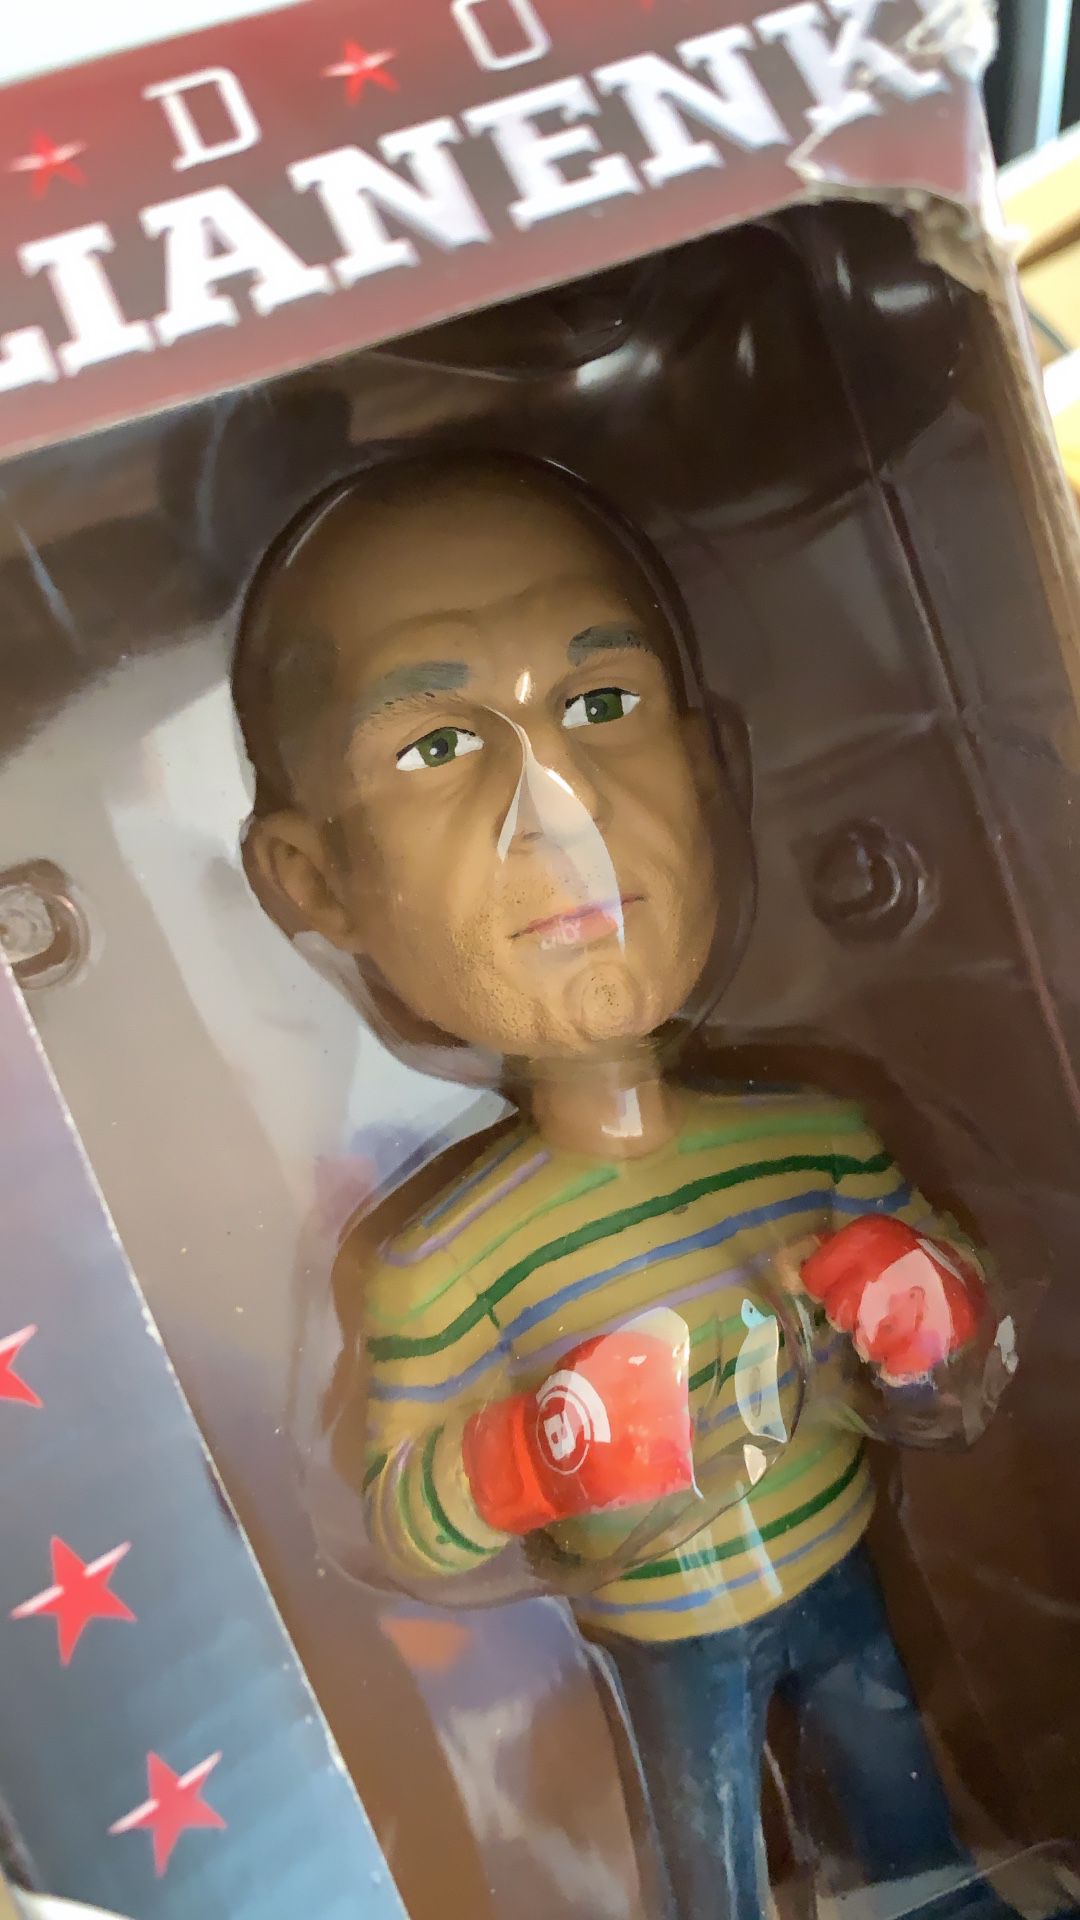 Brand New Fedor Emelianenko Bobblehead - Rare Limited Edition Not Sold in Stores Bellator MMA Game night giveaway UFC